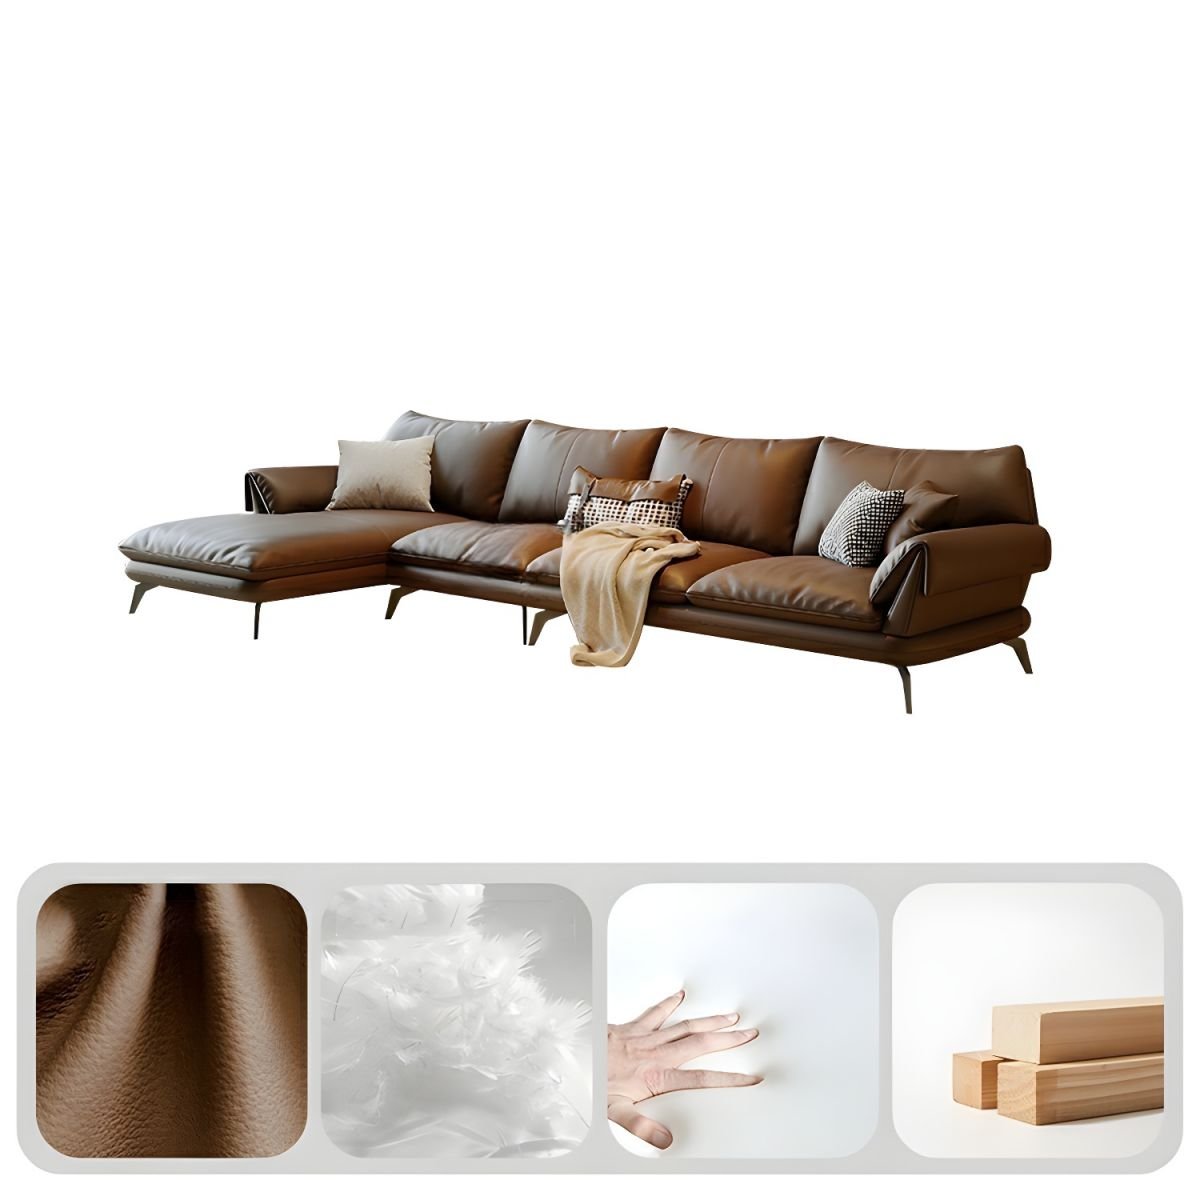 Genuine Leather L-Shaped Sectional Sofa in Brown with Pillows - 142"L x 69"W x 34"H Full Grain Cow Leather